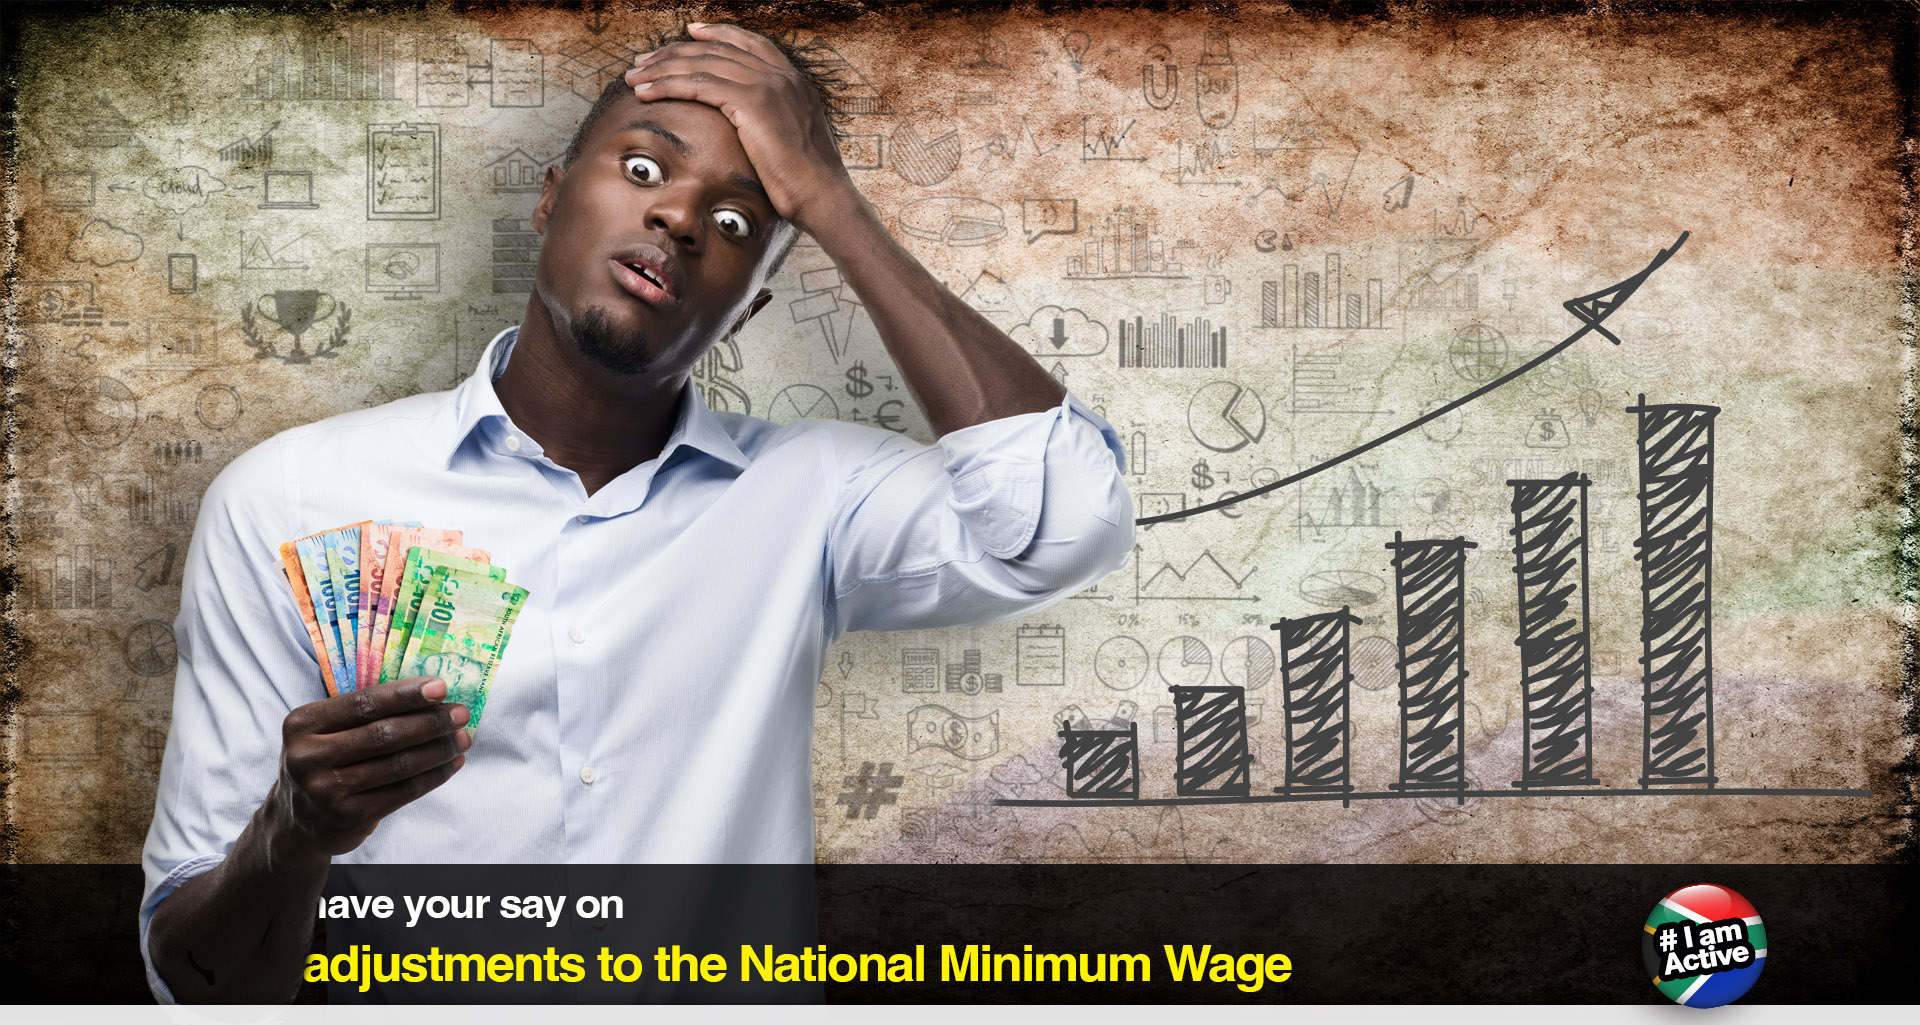 Have a say on adjustments to the National Minimum Wage